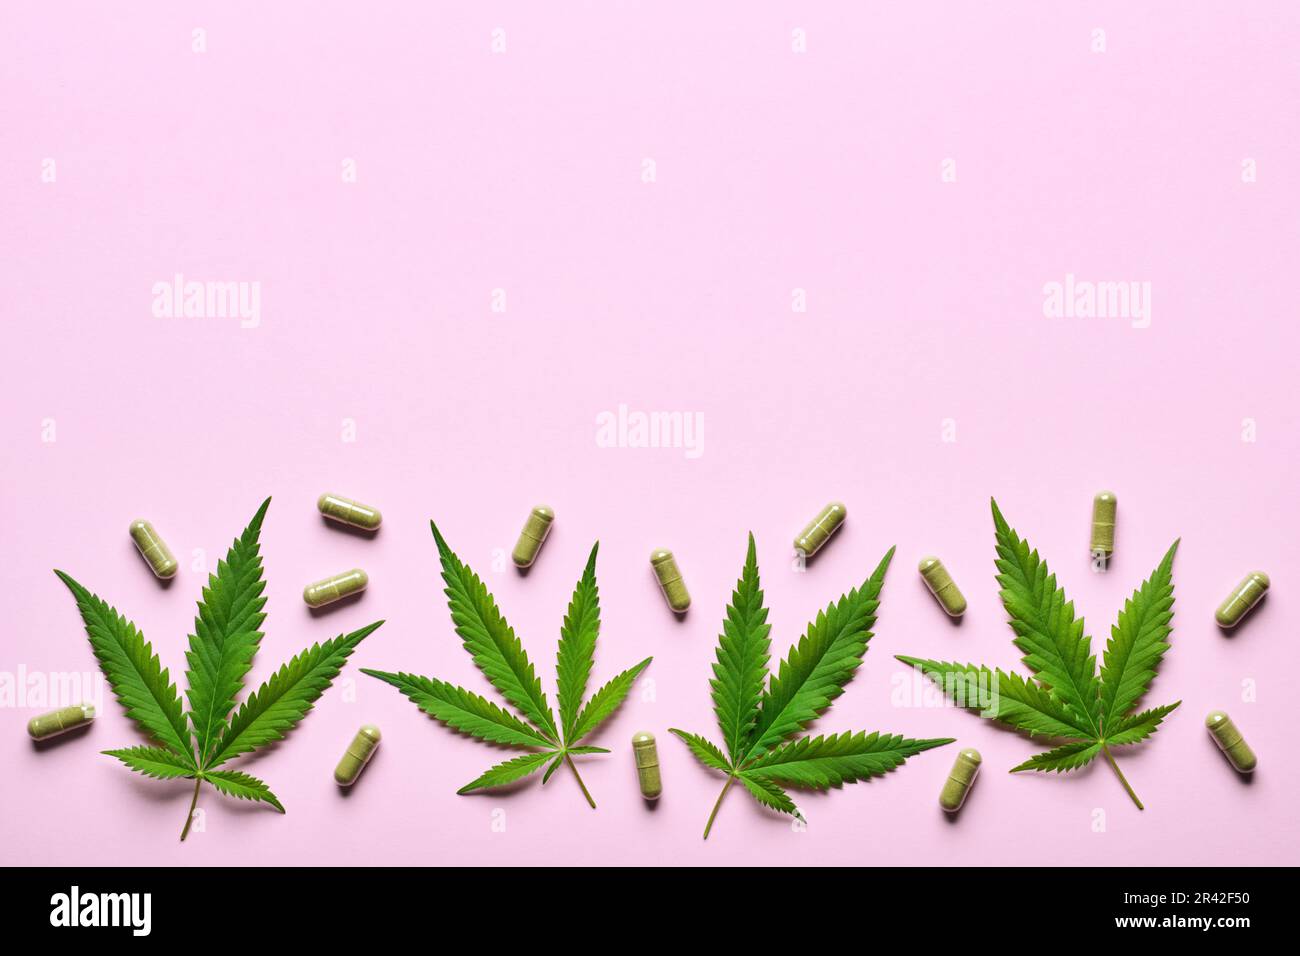 Cannabis extract capsules and hemp leaves pattern on pink background. Calming, anti-stress and sleeping concept Stock Photo